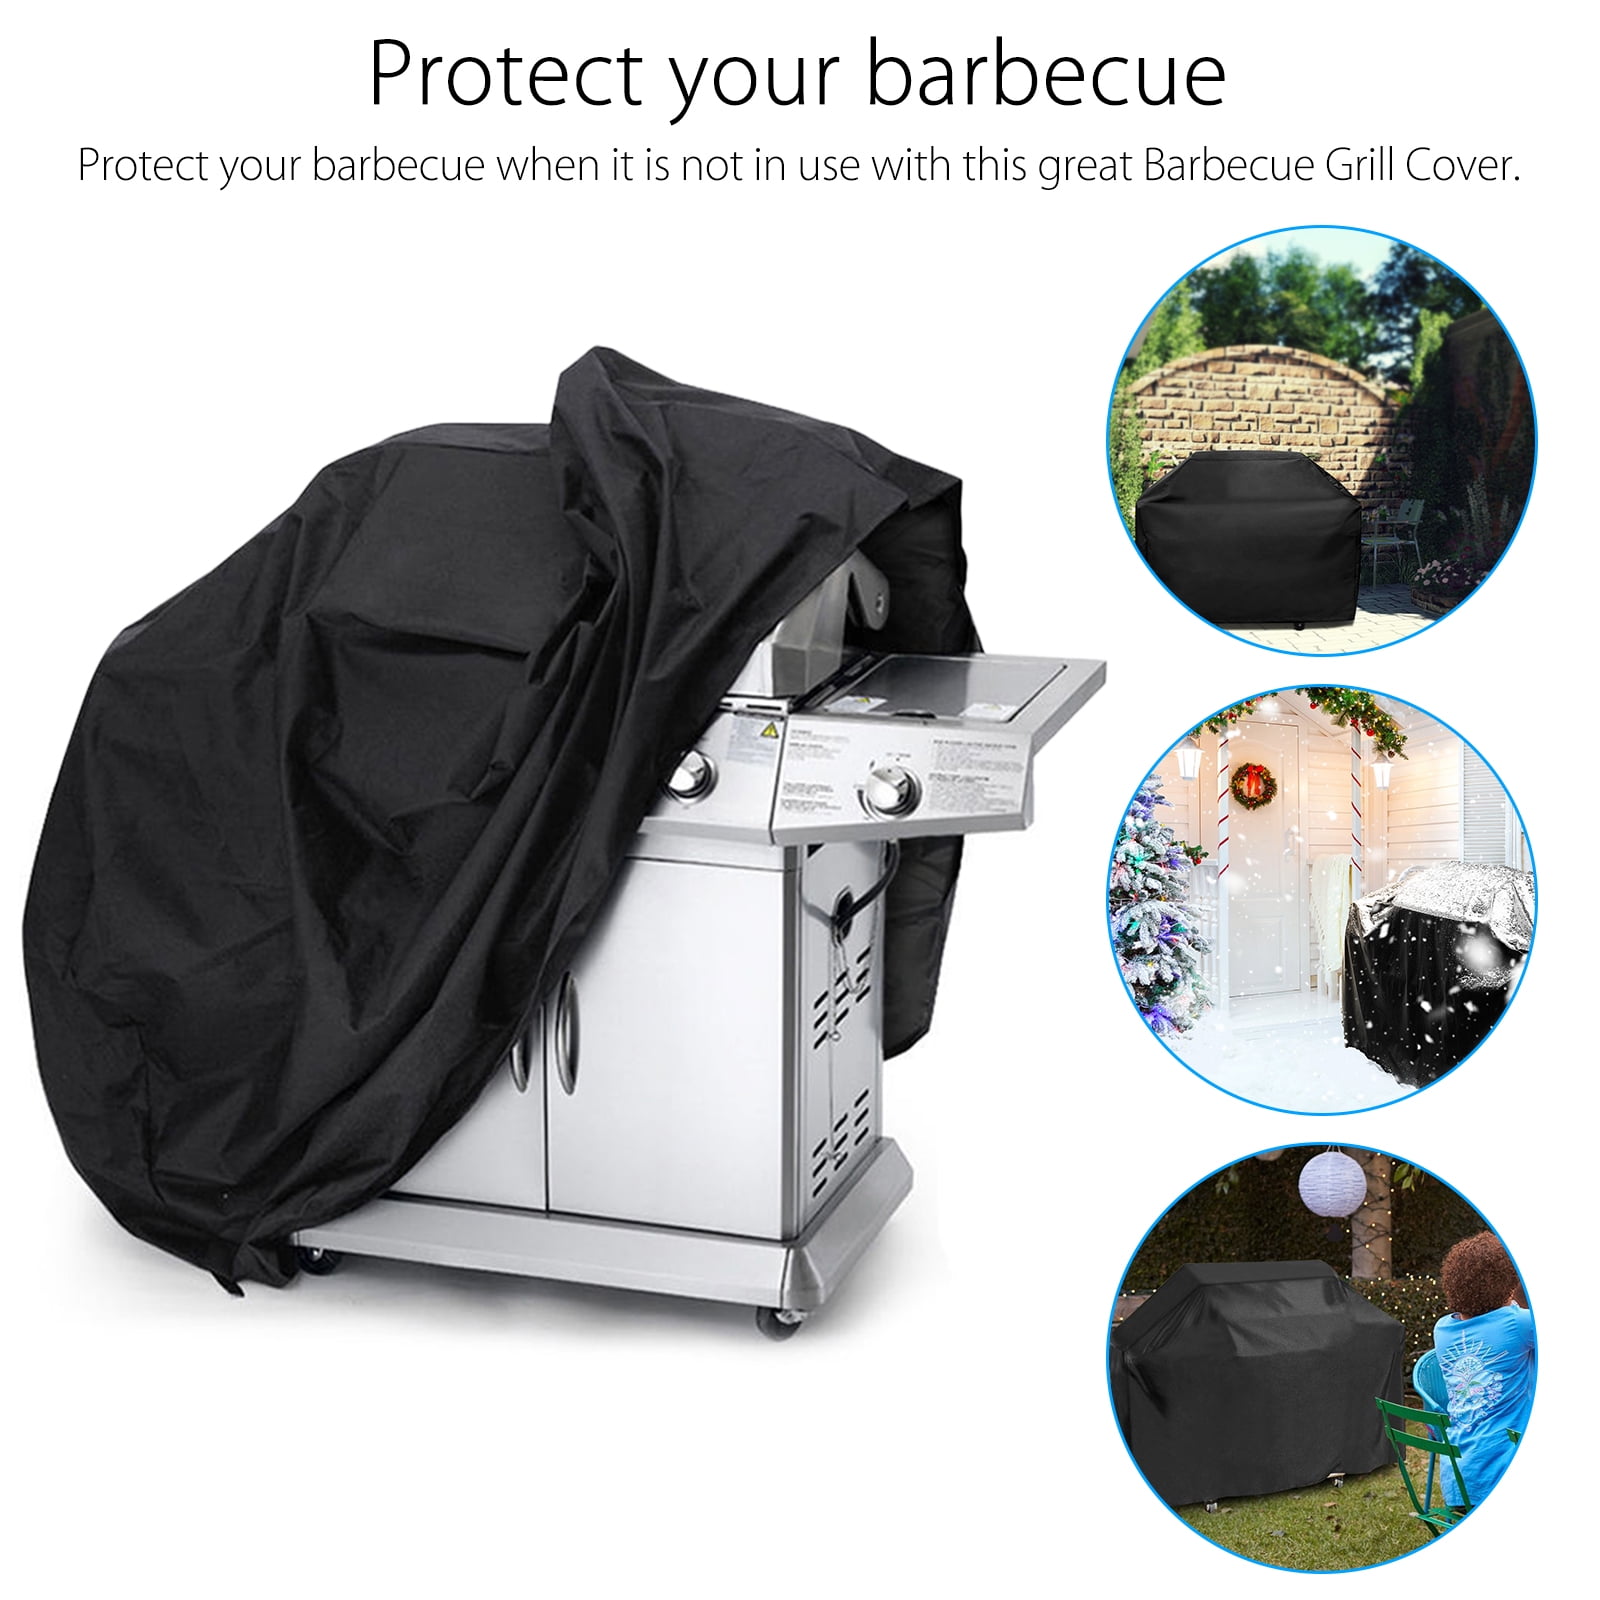 Gas BBQ Grill Cover Barbecue Heavy Duty Waterproof 58" Outdoor Protection New 